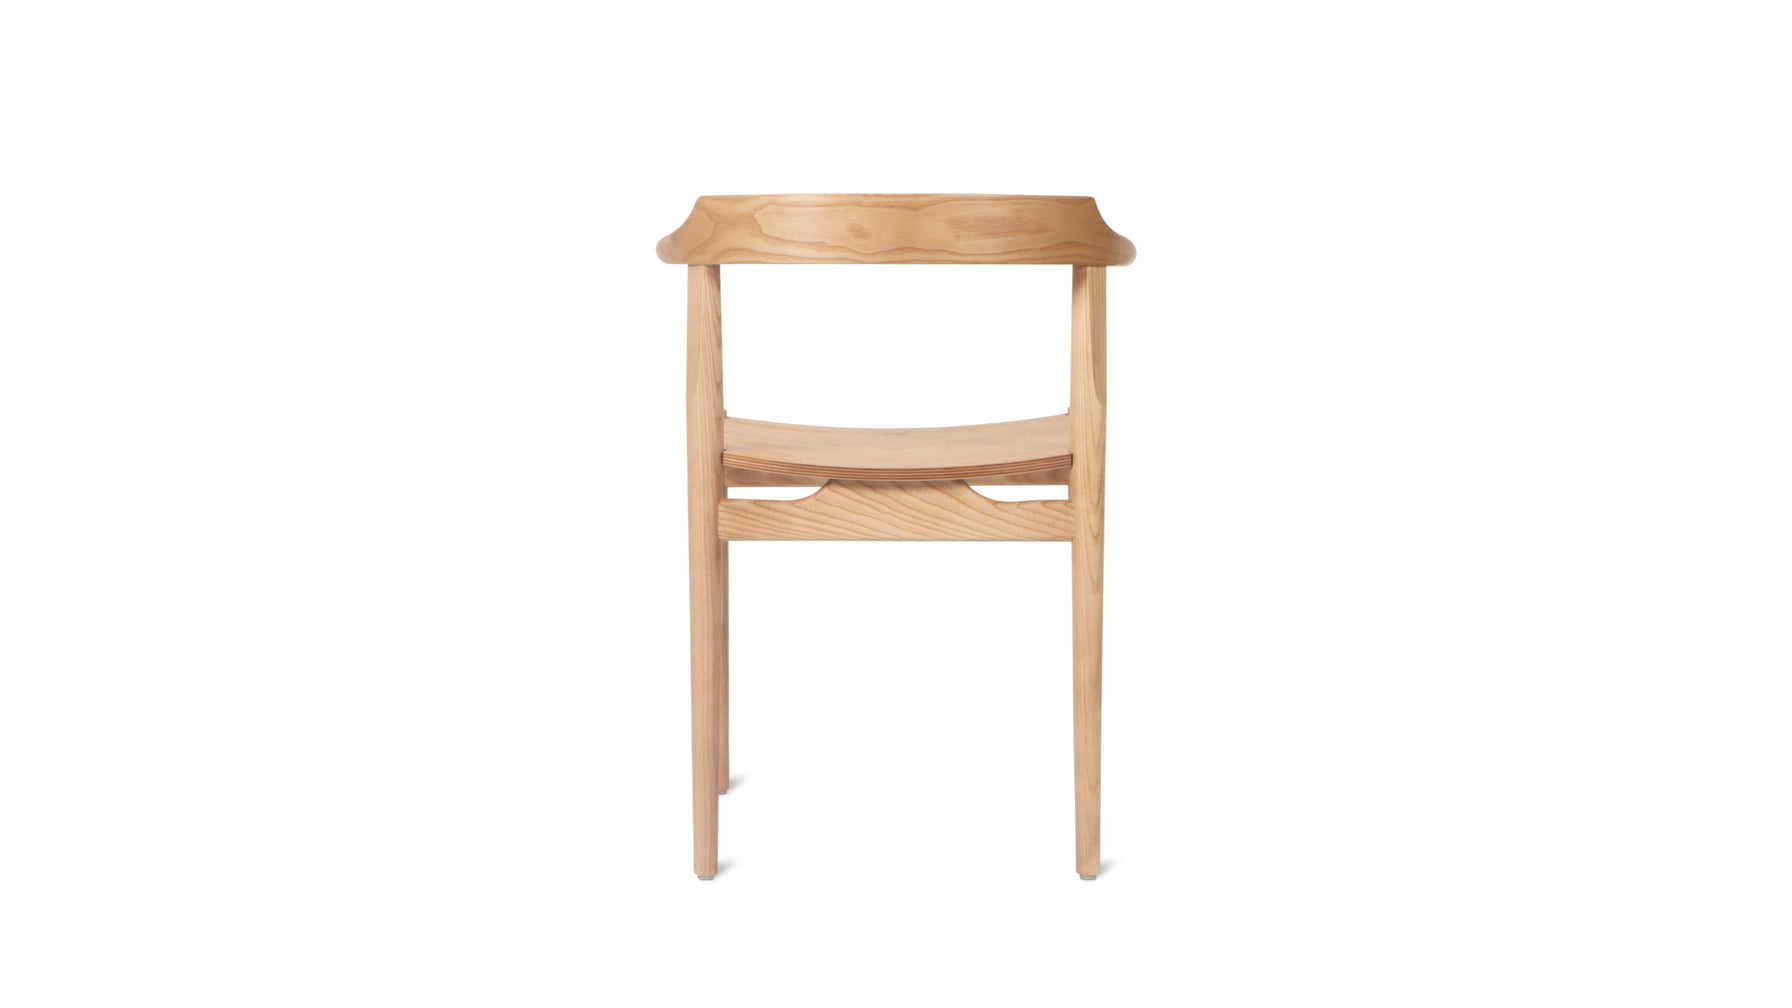 Tuck In Dining Chair, White Oak, Wood Seat - Image 6